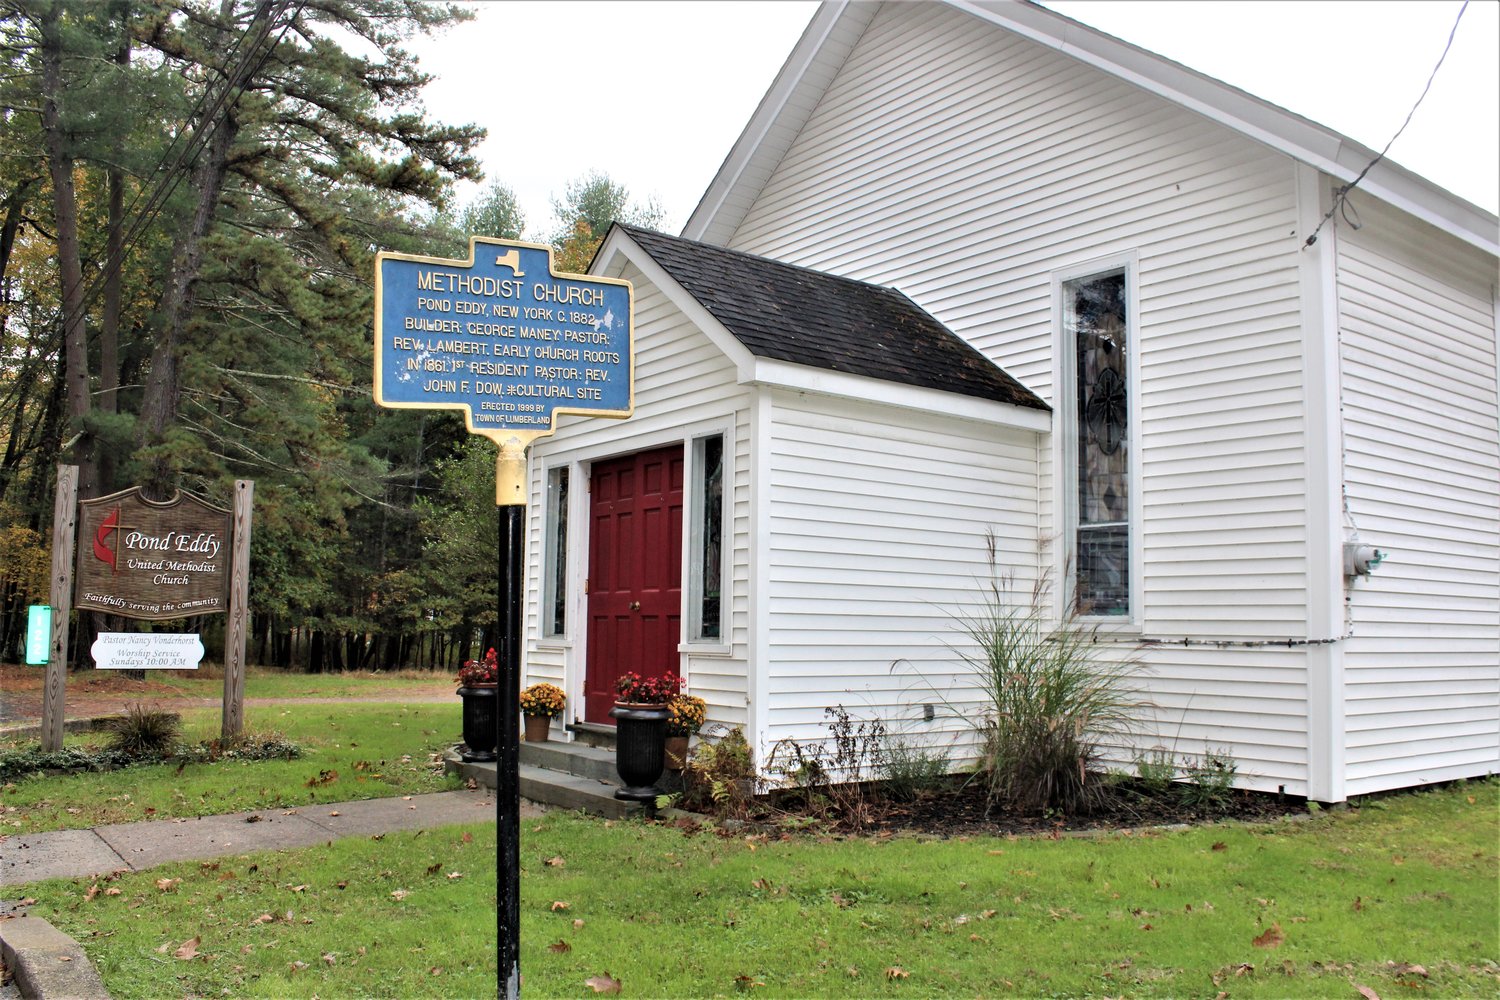 The Pond Eddy United Methodist Church has been the “little church in the vale” for more than 16 decades. Members and guests recently celebrated the church’s 160th anniversary.